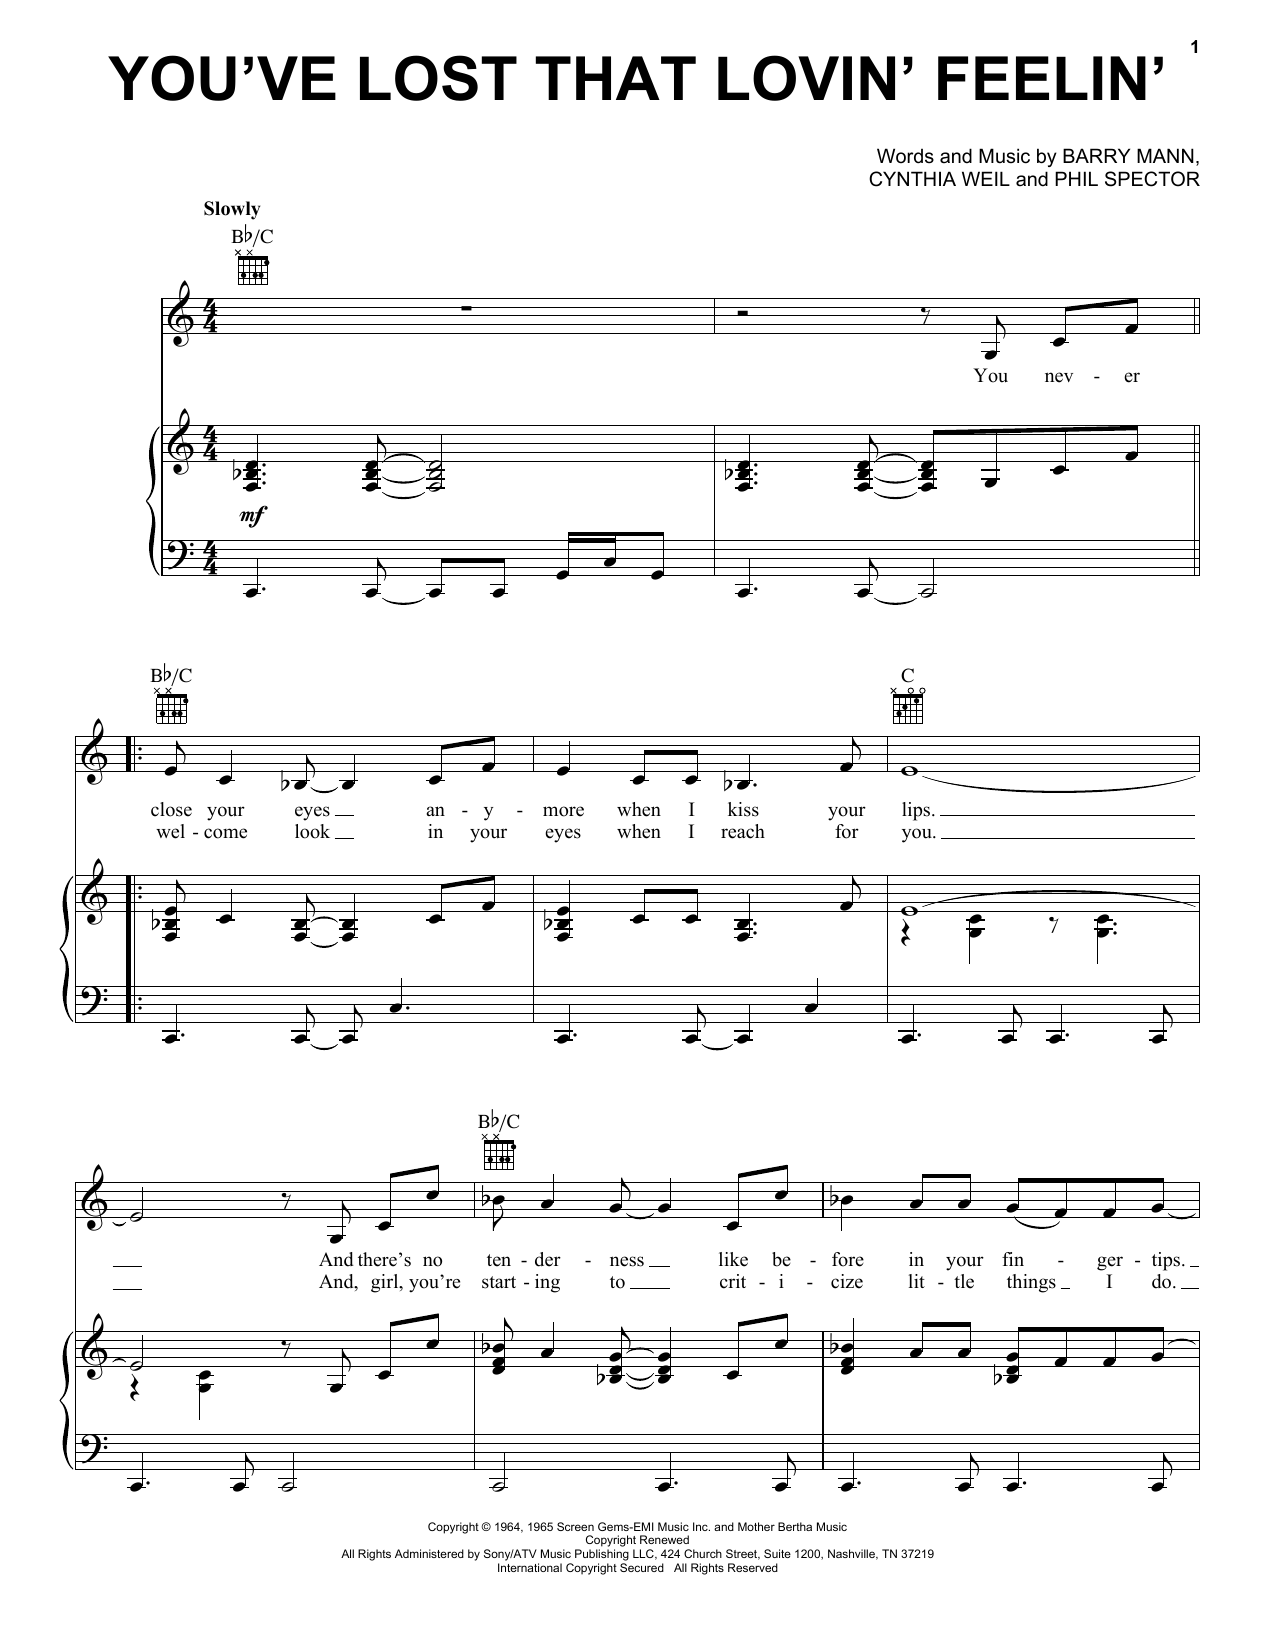 Elvis Presley You've Lost That Lovin' Feelin' sheet music notes and chords. Download Printable PDF.